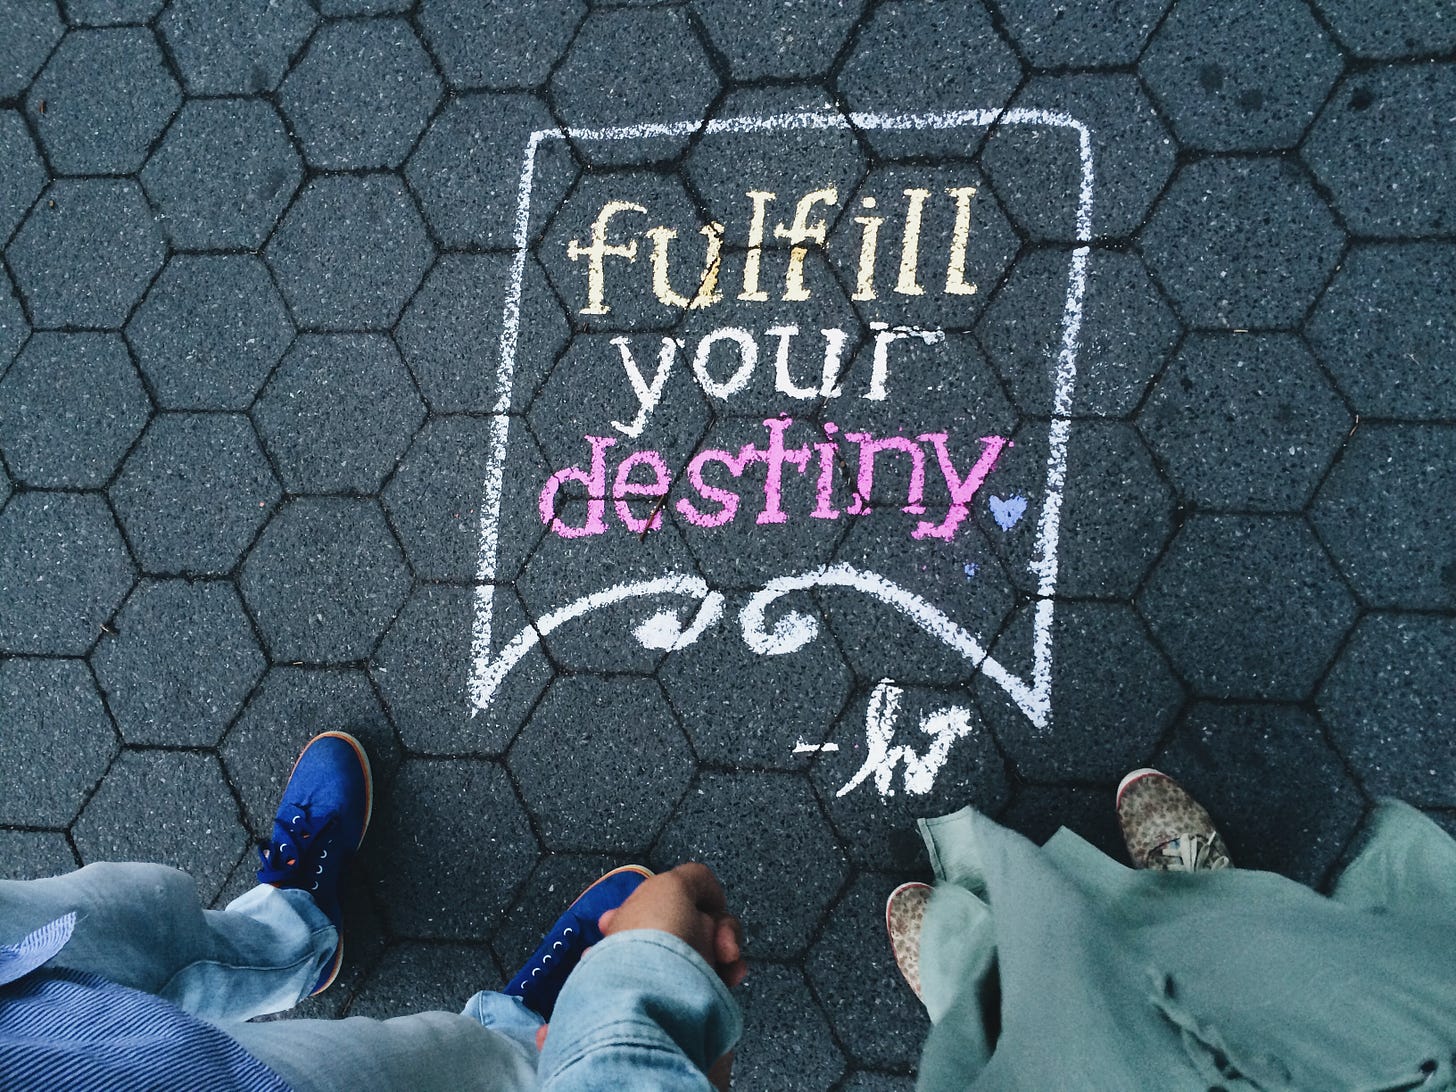 The words "fulfill your destiny" written in multicolored chalk on an asphalt surface. two pairs of shoes - one blue, one brown, stand in front of the drawing.